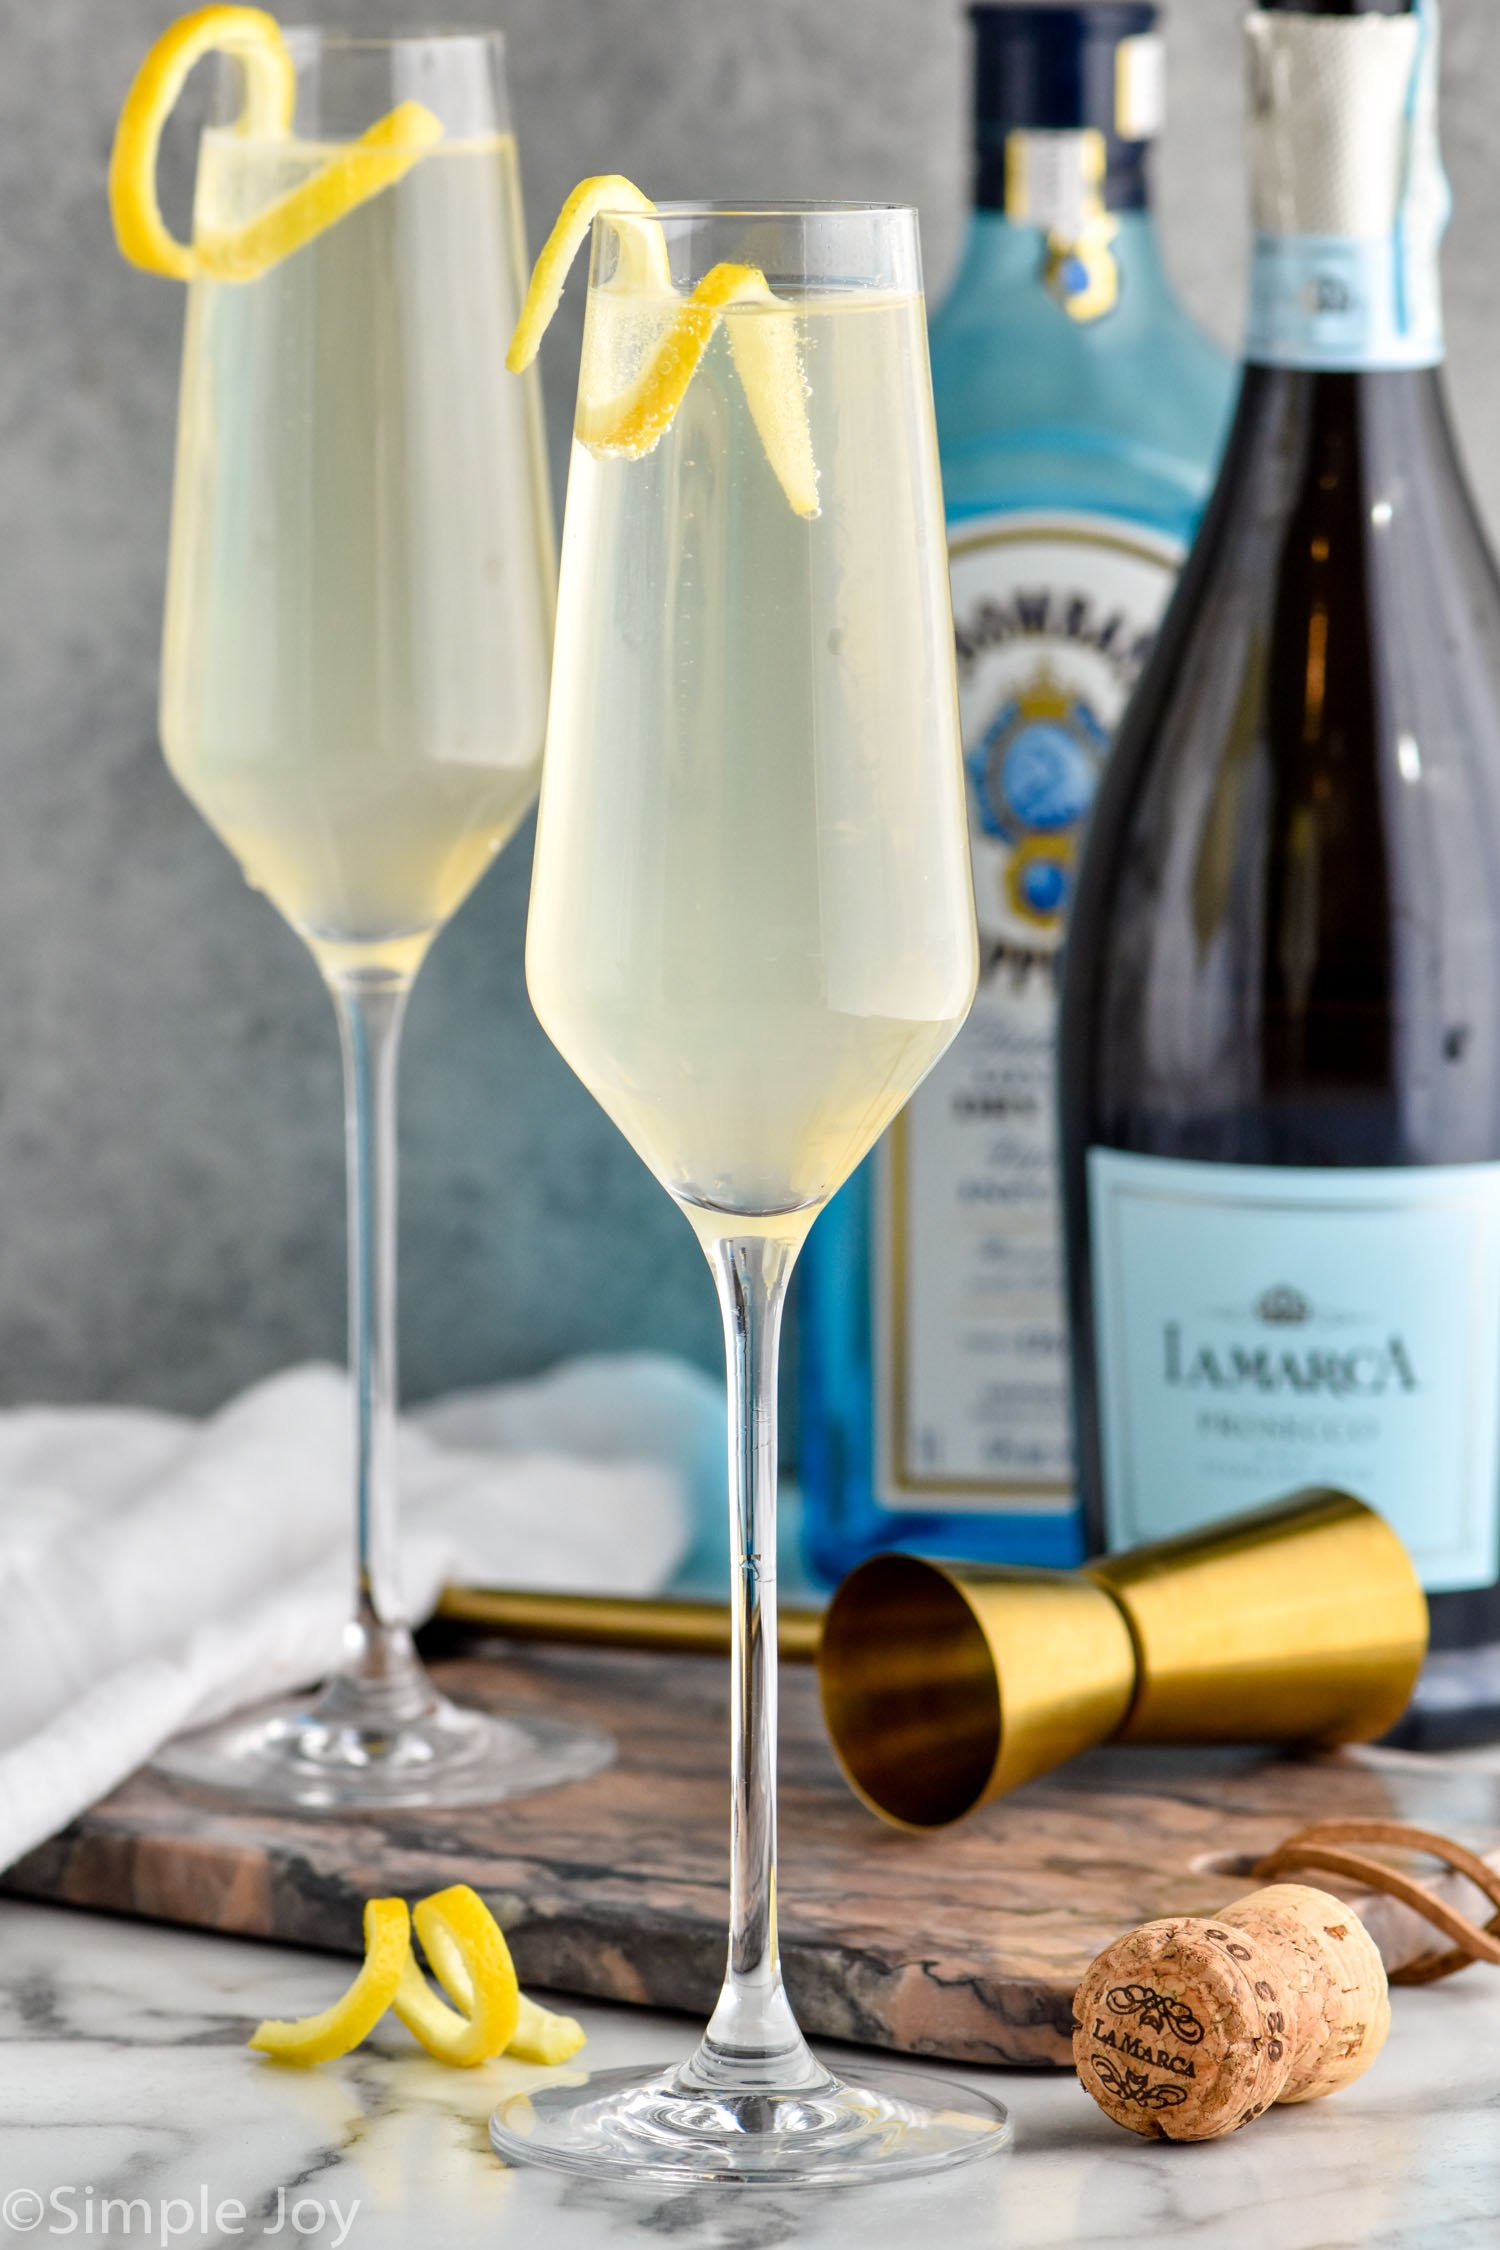 IV. Step-by-Step Guide on How to Make a French 75